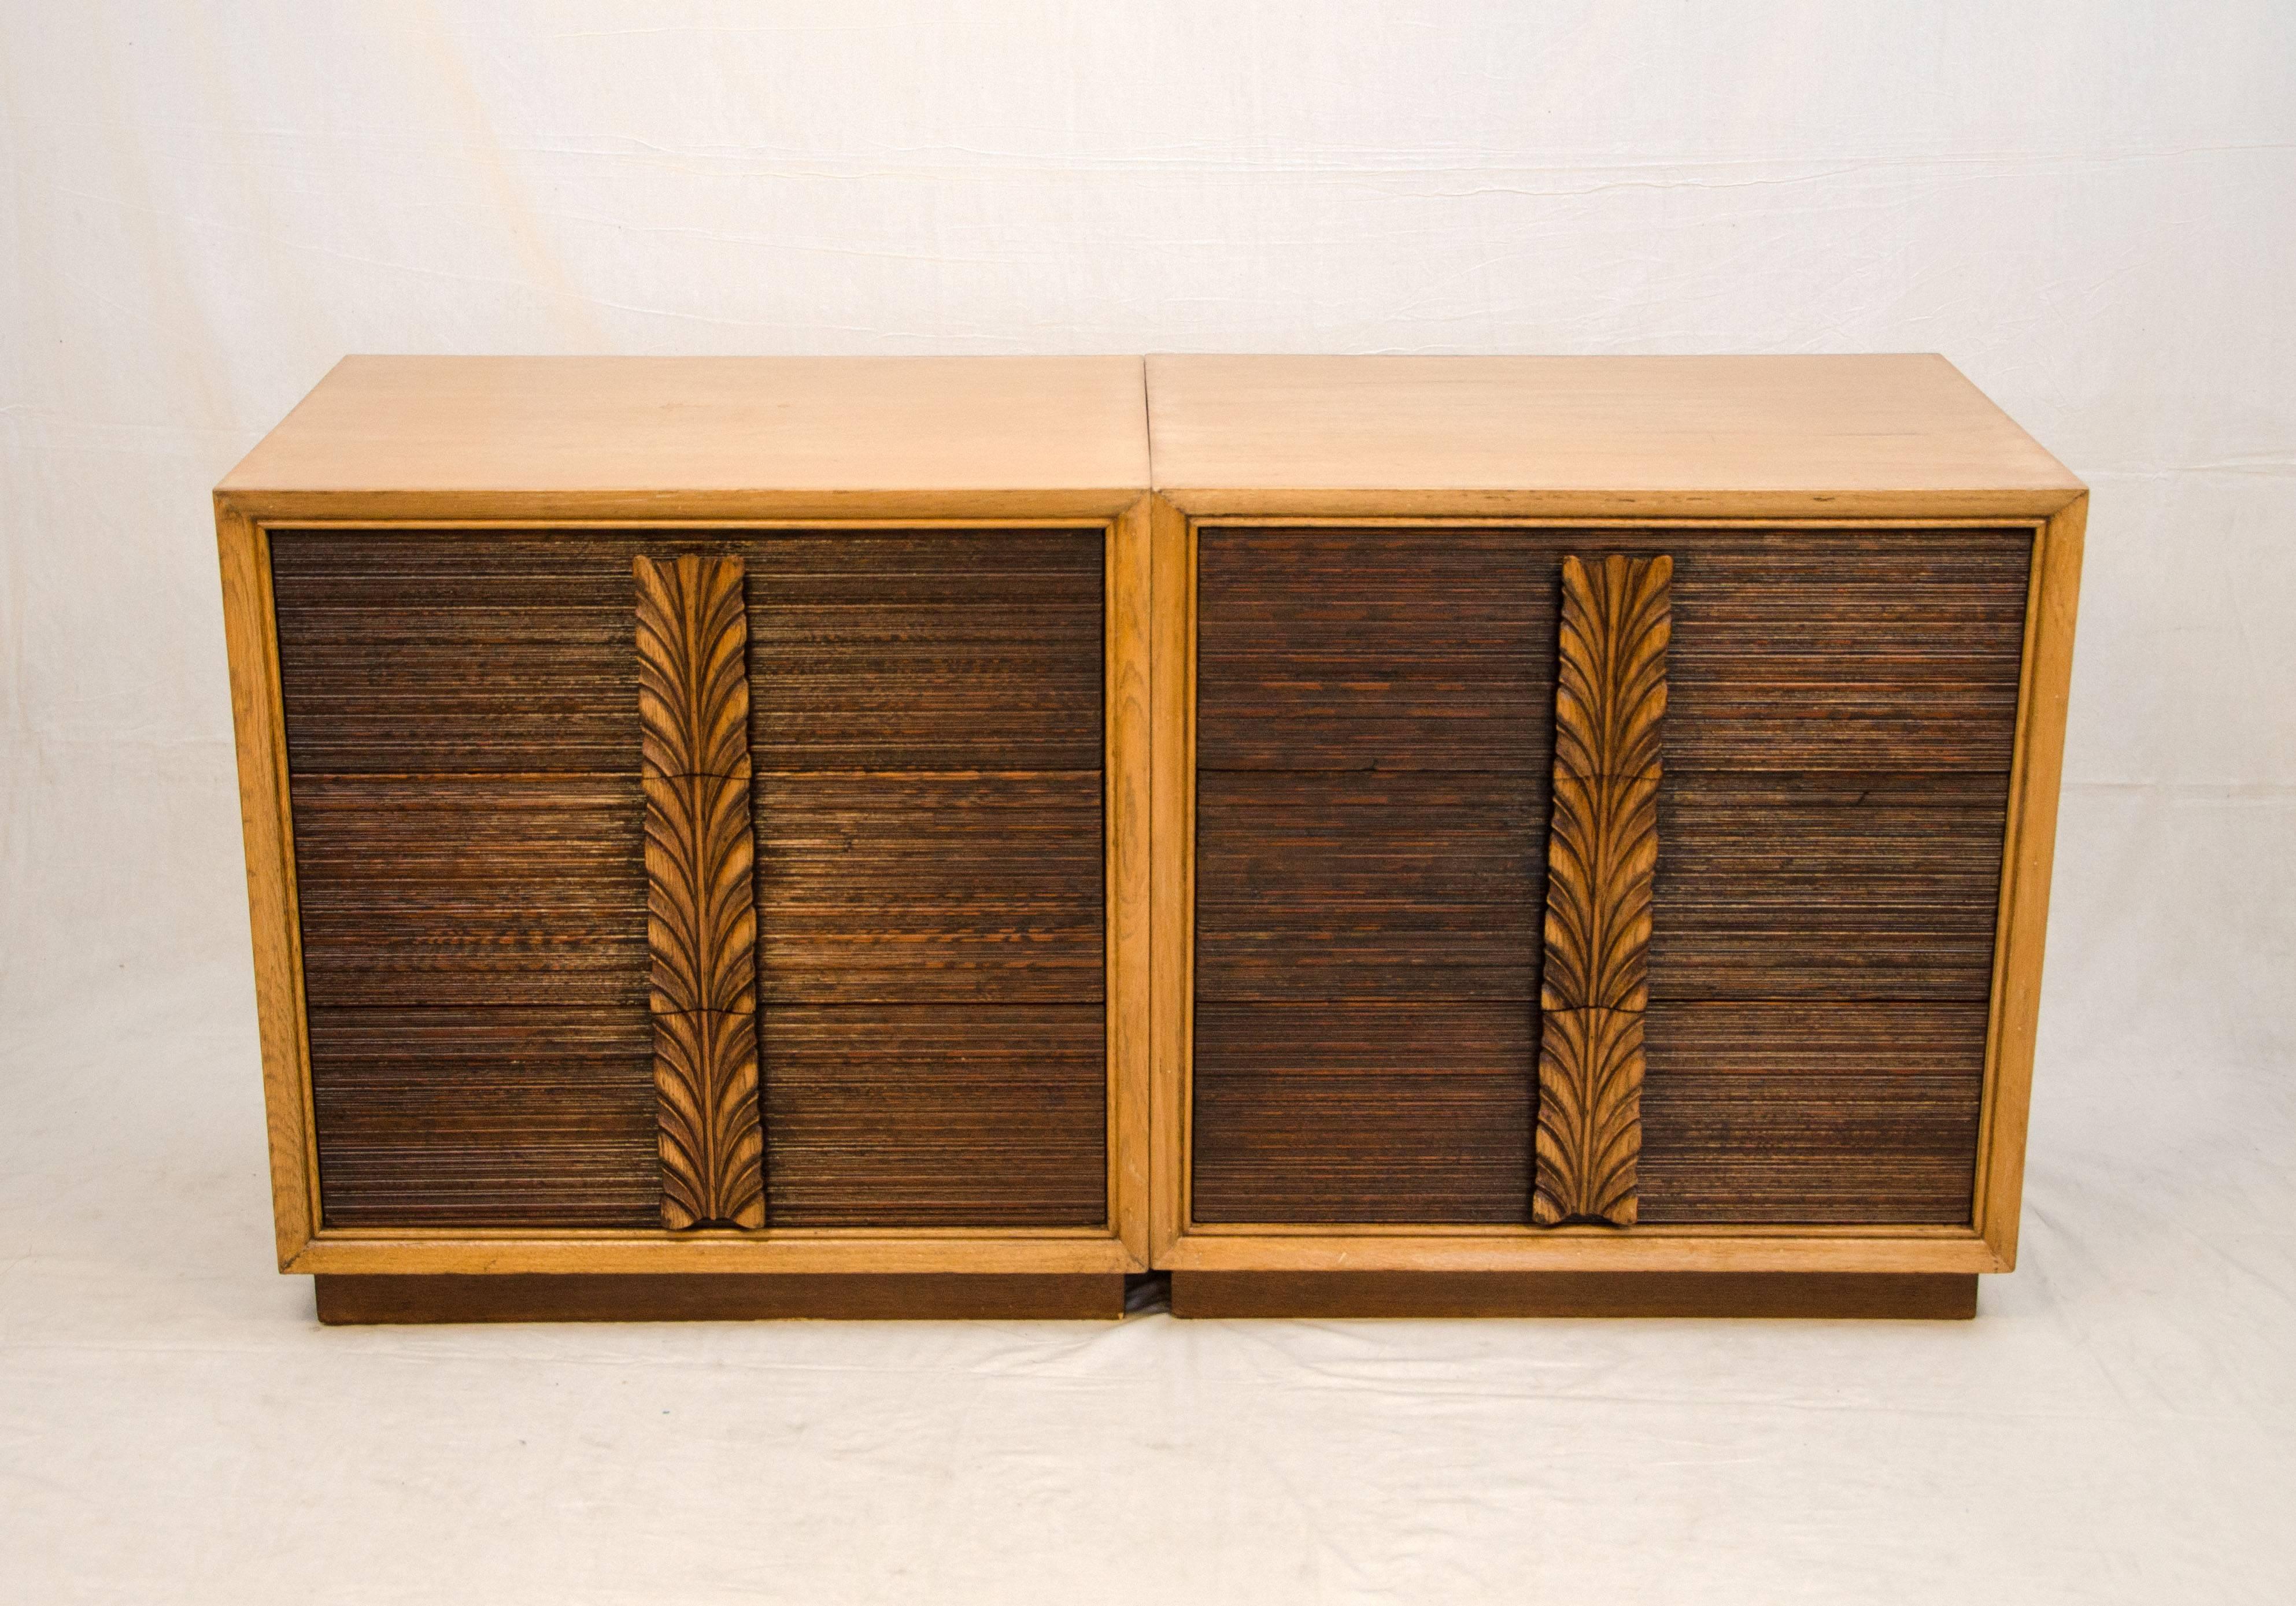 Nice pair of small dressers that can be used separately or placed close together. These have a style similar to Paul Frankl designed furniture from the, 1940s-1950s. The blond oak cases are accented by the darker combed wood drawer fronts and